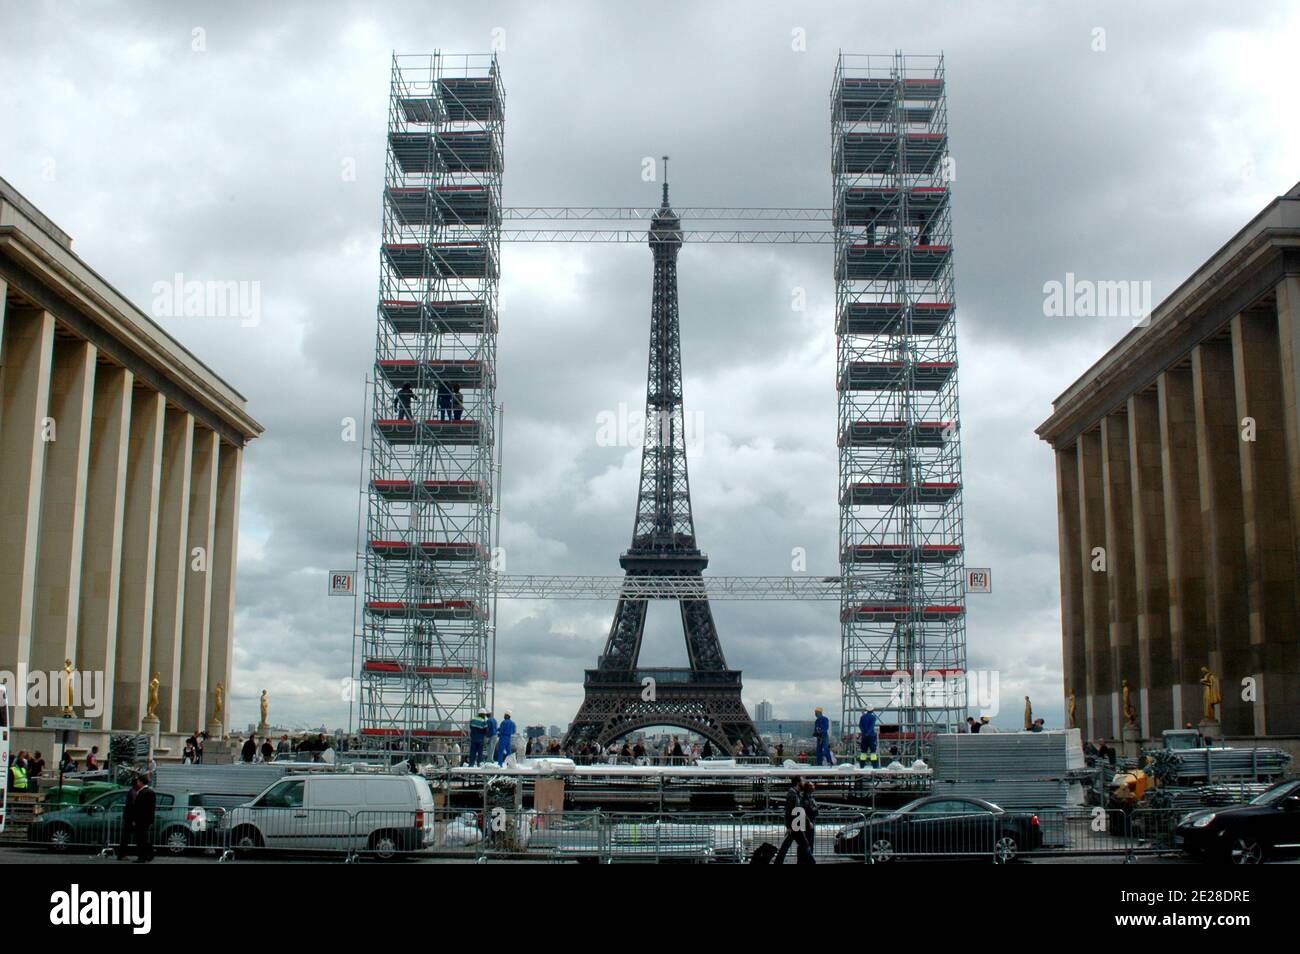 A replica of the Twin Towers is being built on Trocadero Square in front of the Eiffel Tower in Paris, France on September 9, 2011 to mark the 10th anniversary of the attacks in New York City. Photo by Alain Apaydin/ABACAPRESS.COM Stock Photo